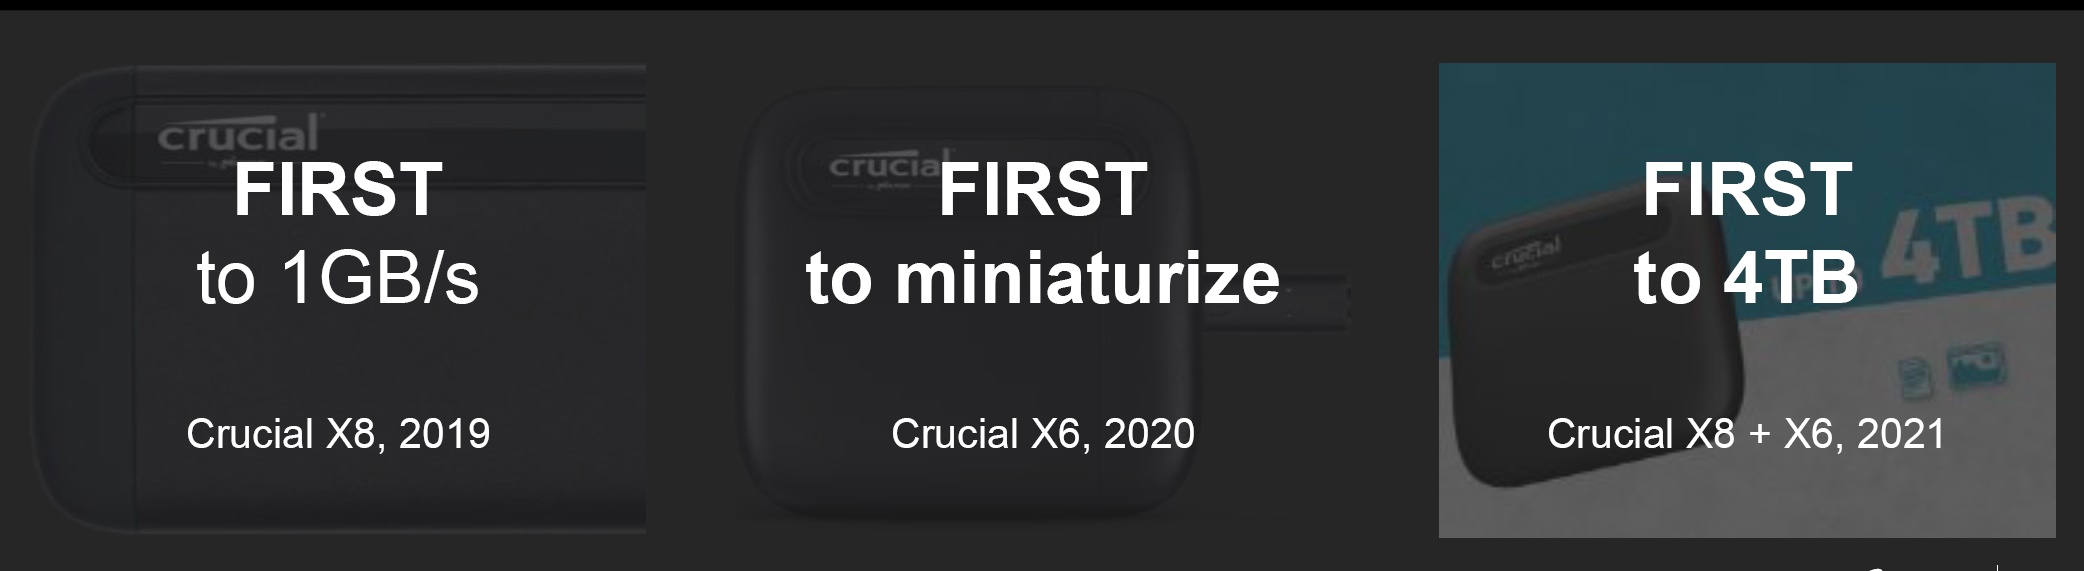 Introducing the Crucial X9 Pro for Mac - Crucial